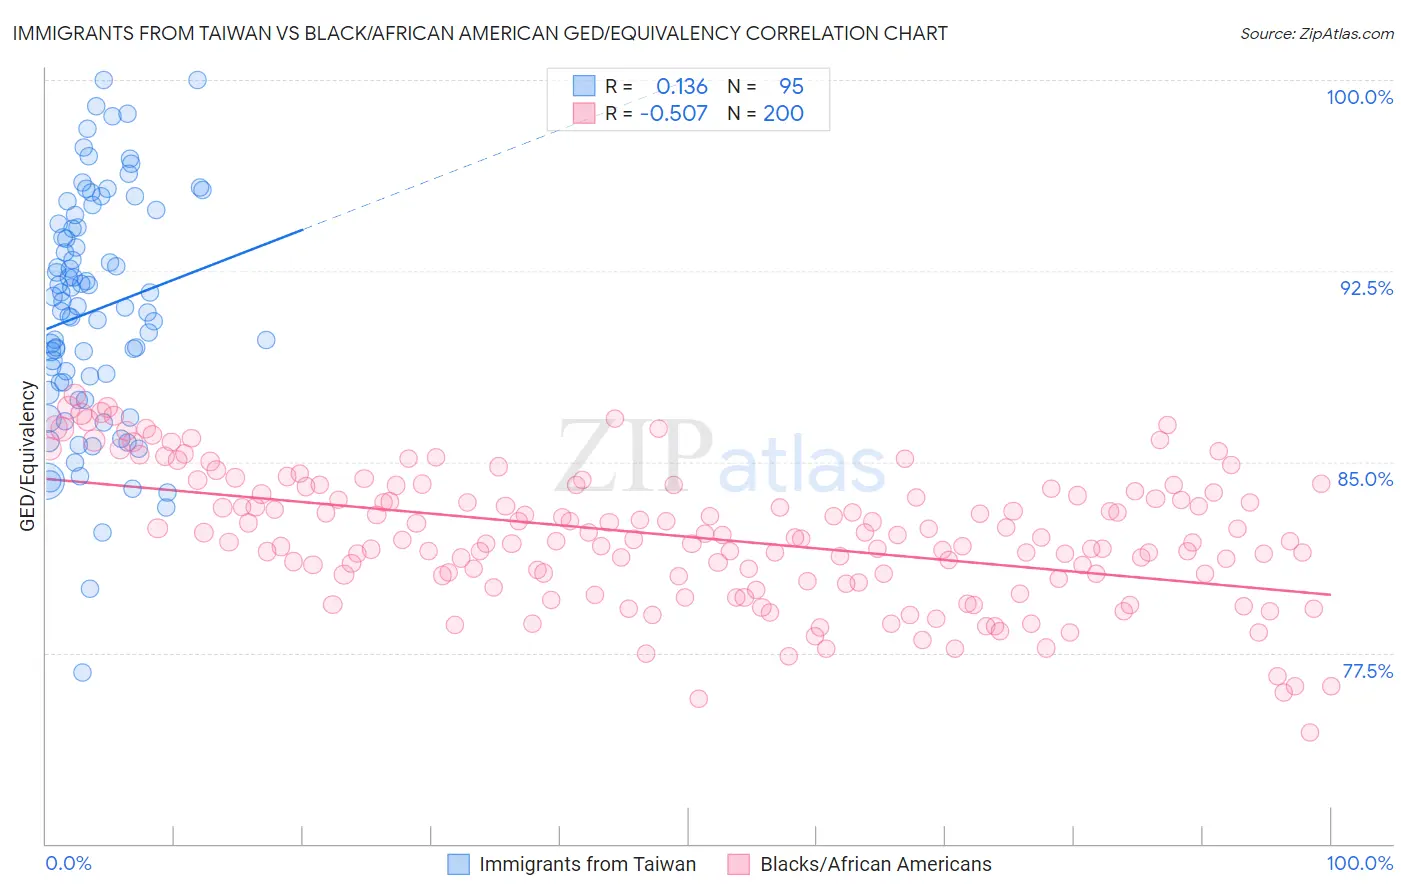 Immigrants from Taiwan vs Black/African American GED/Equivalency